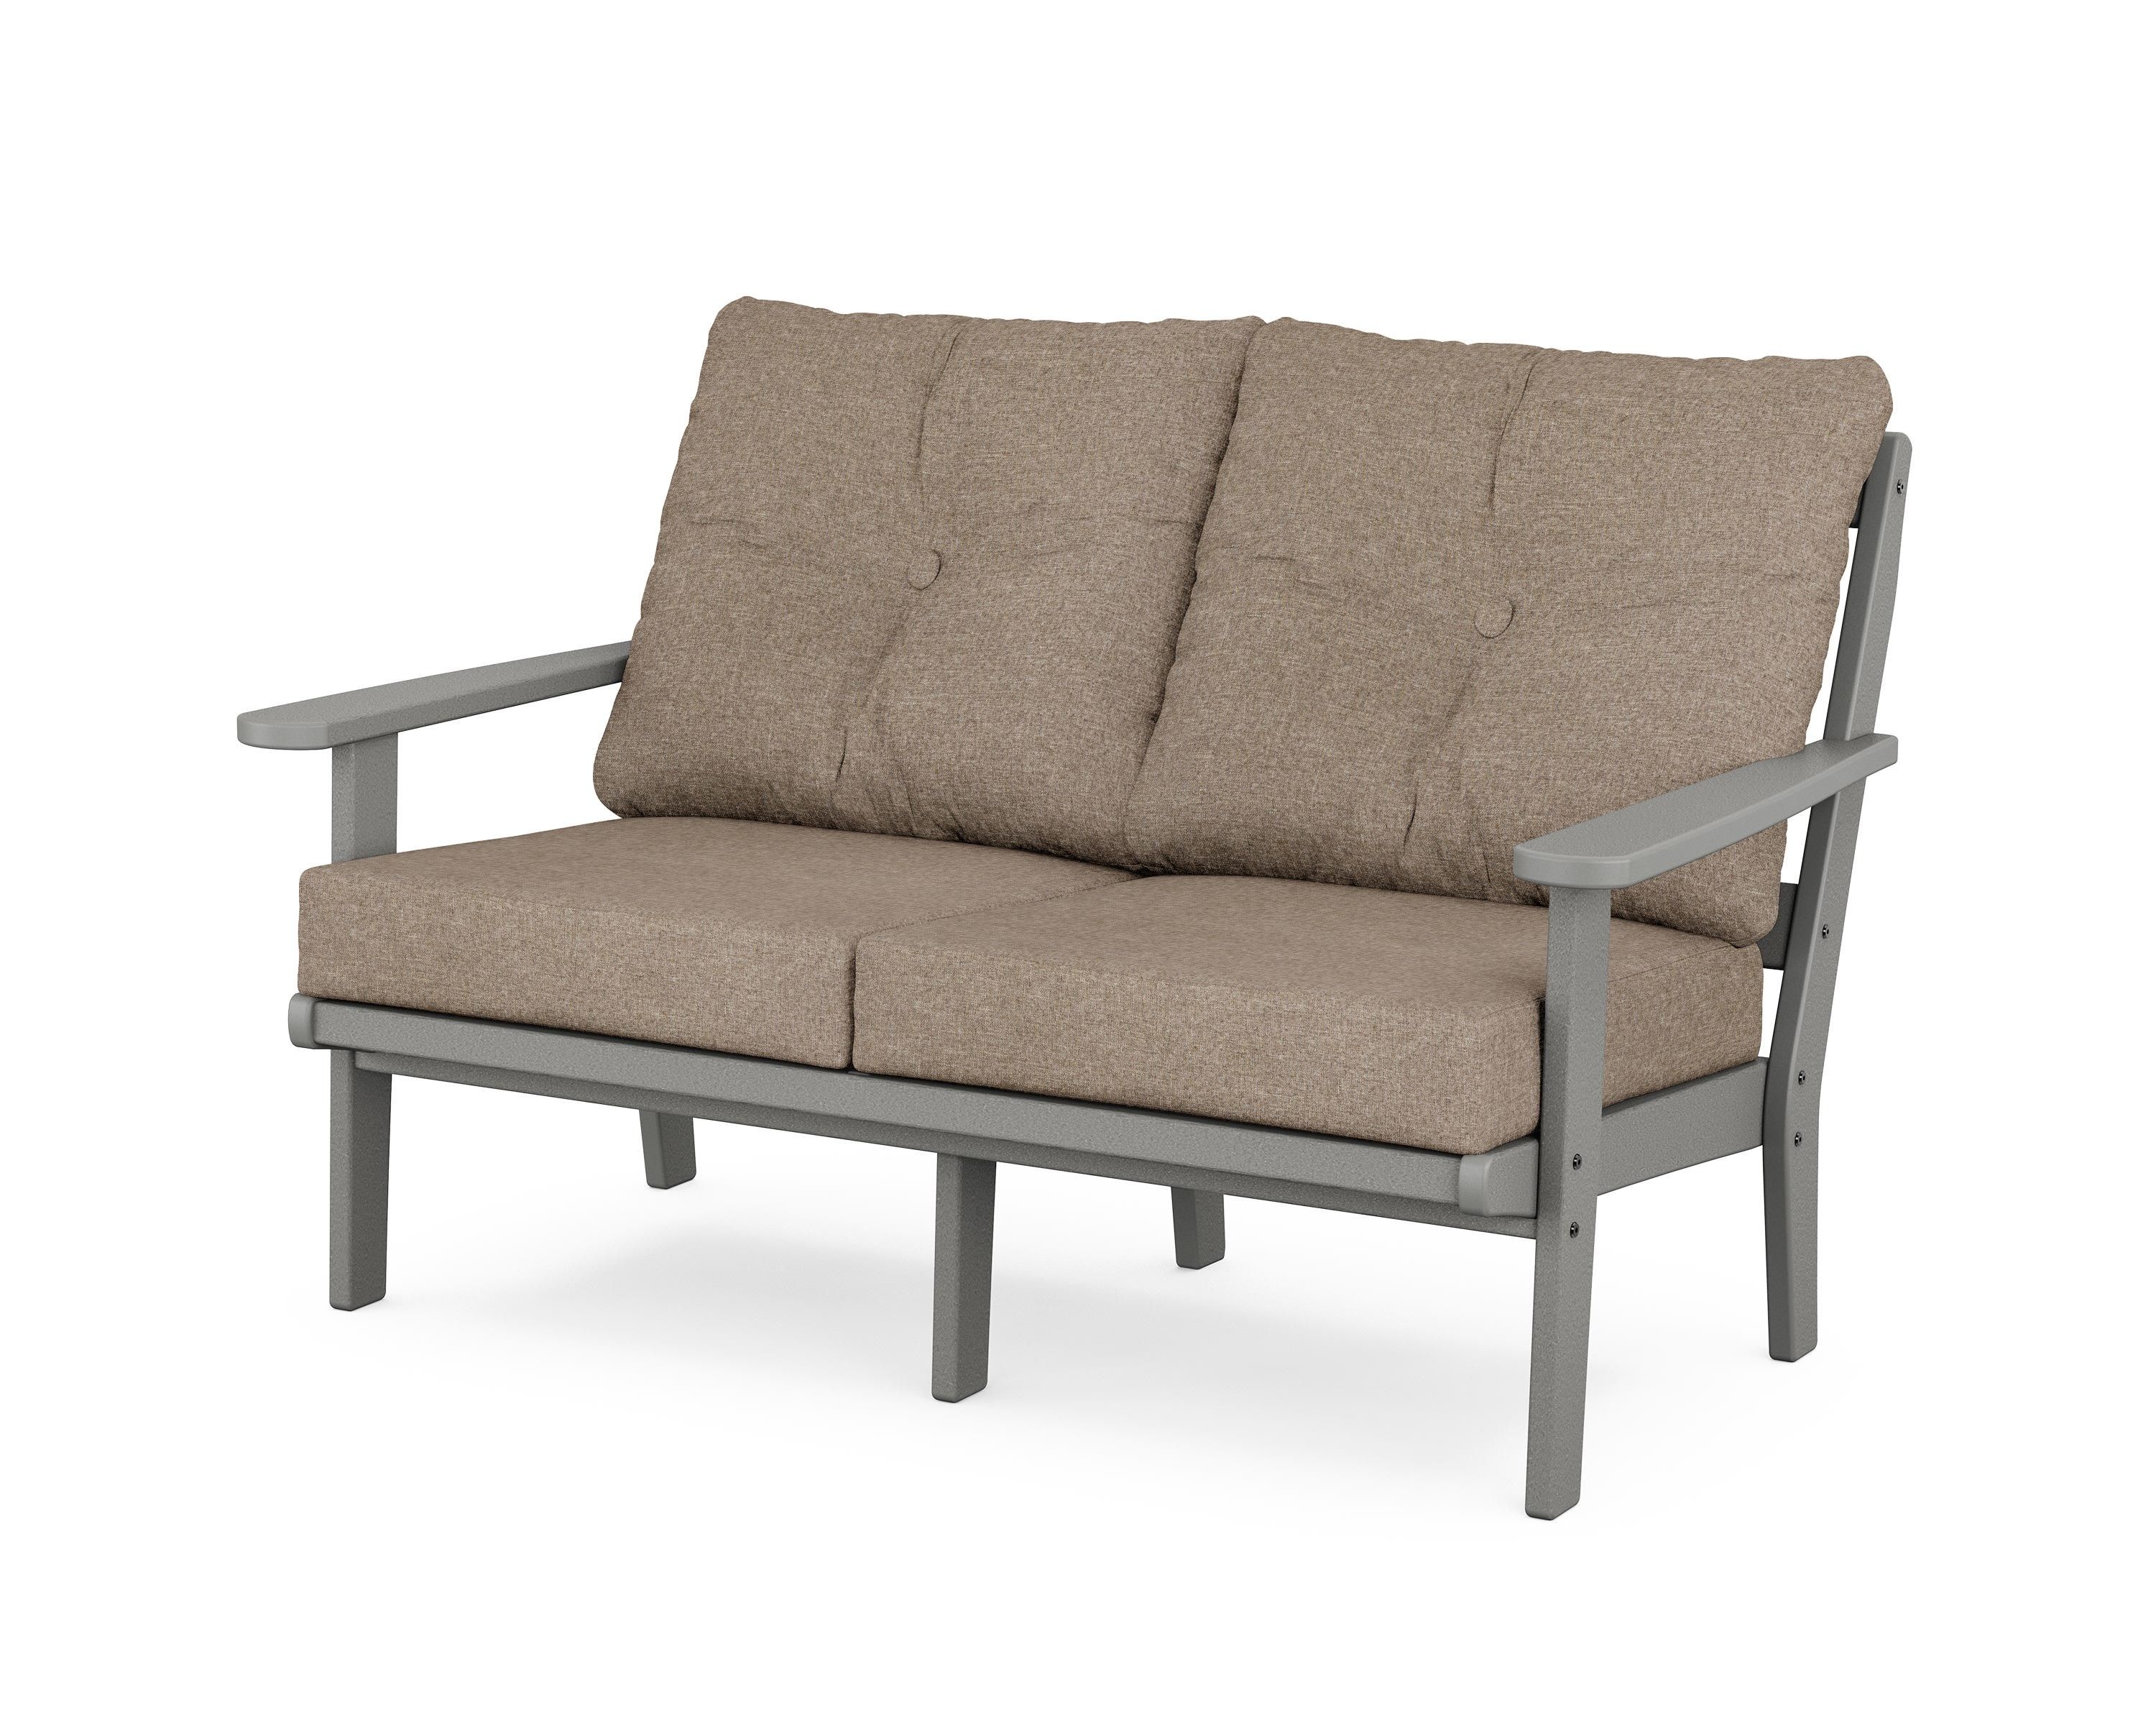 Trex Outdoor Furniture Cape Cod Deep Seating Loveseat